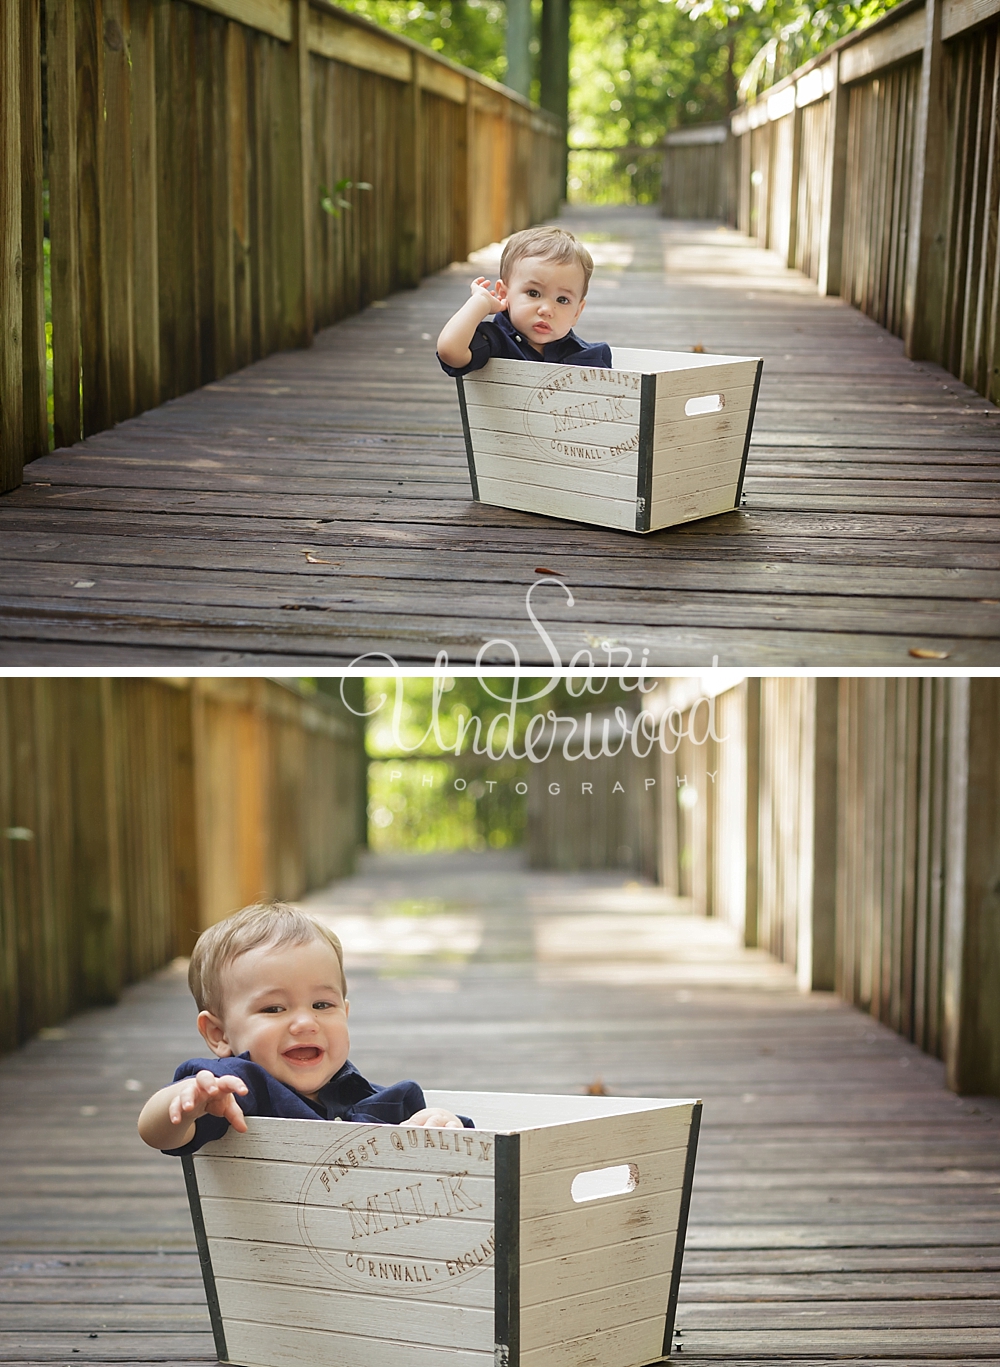 Orlando One-Year-Old Photography Session